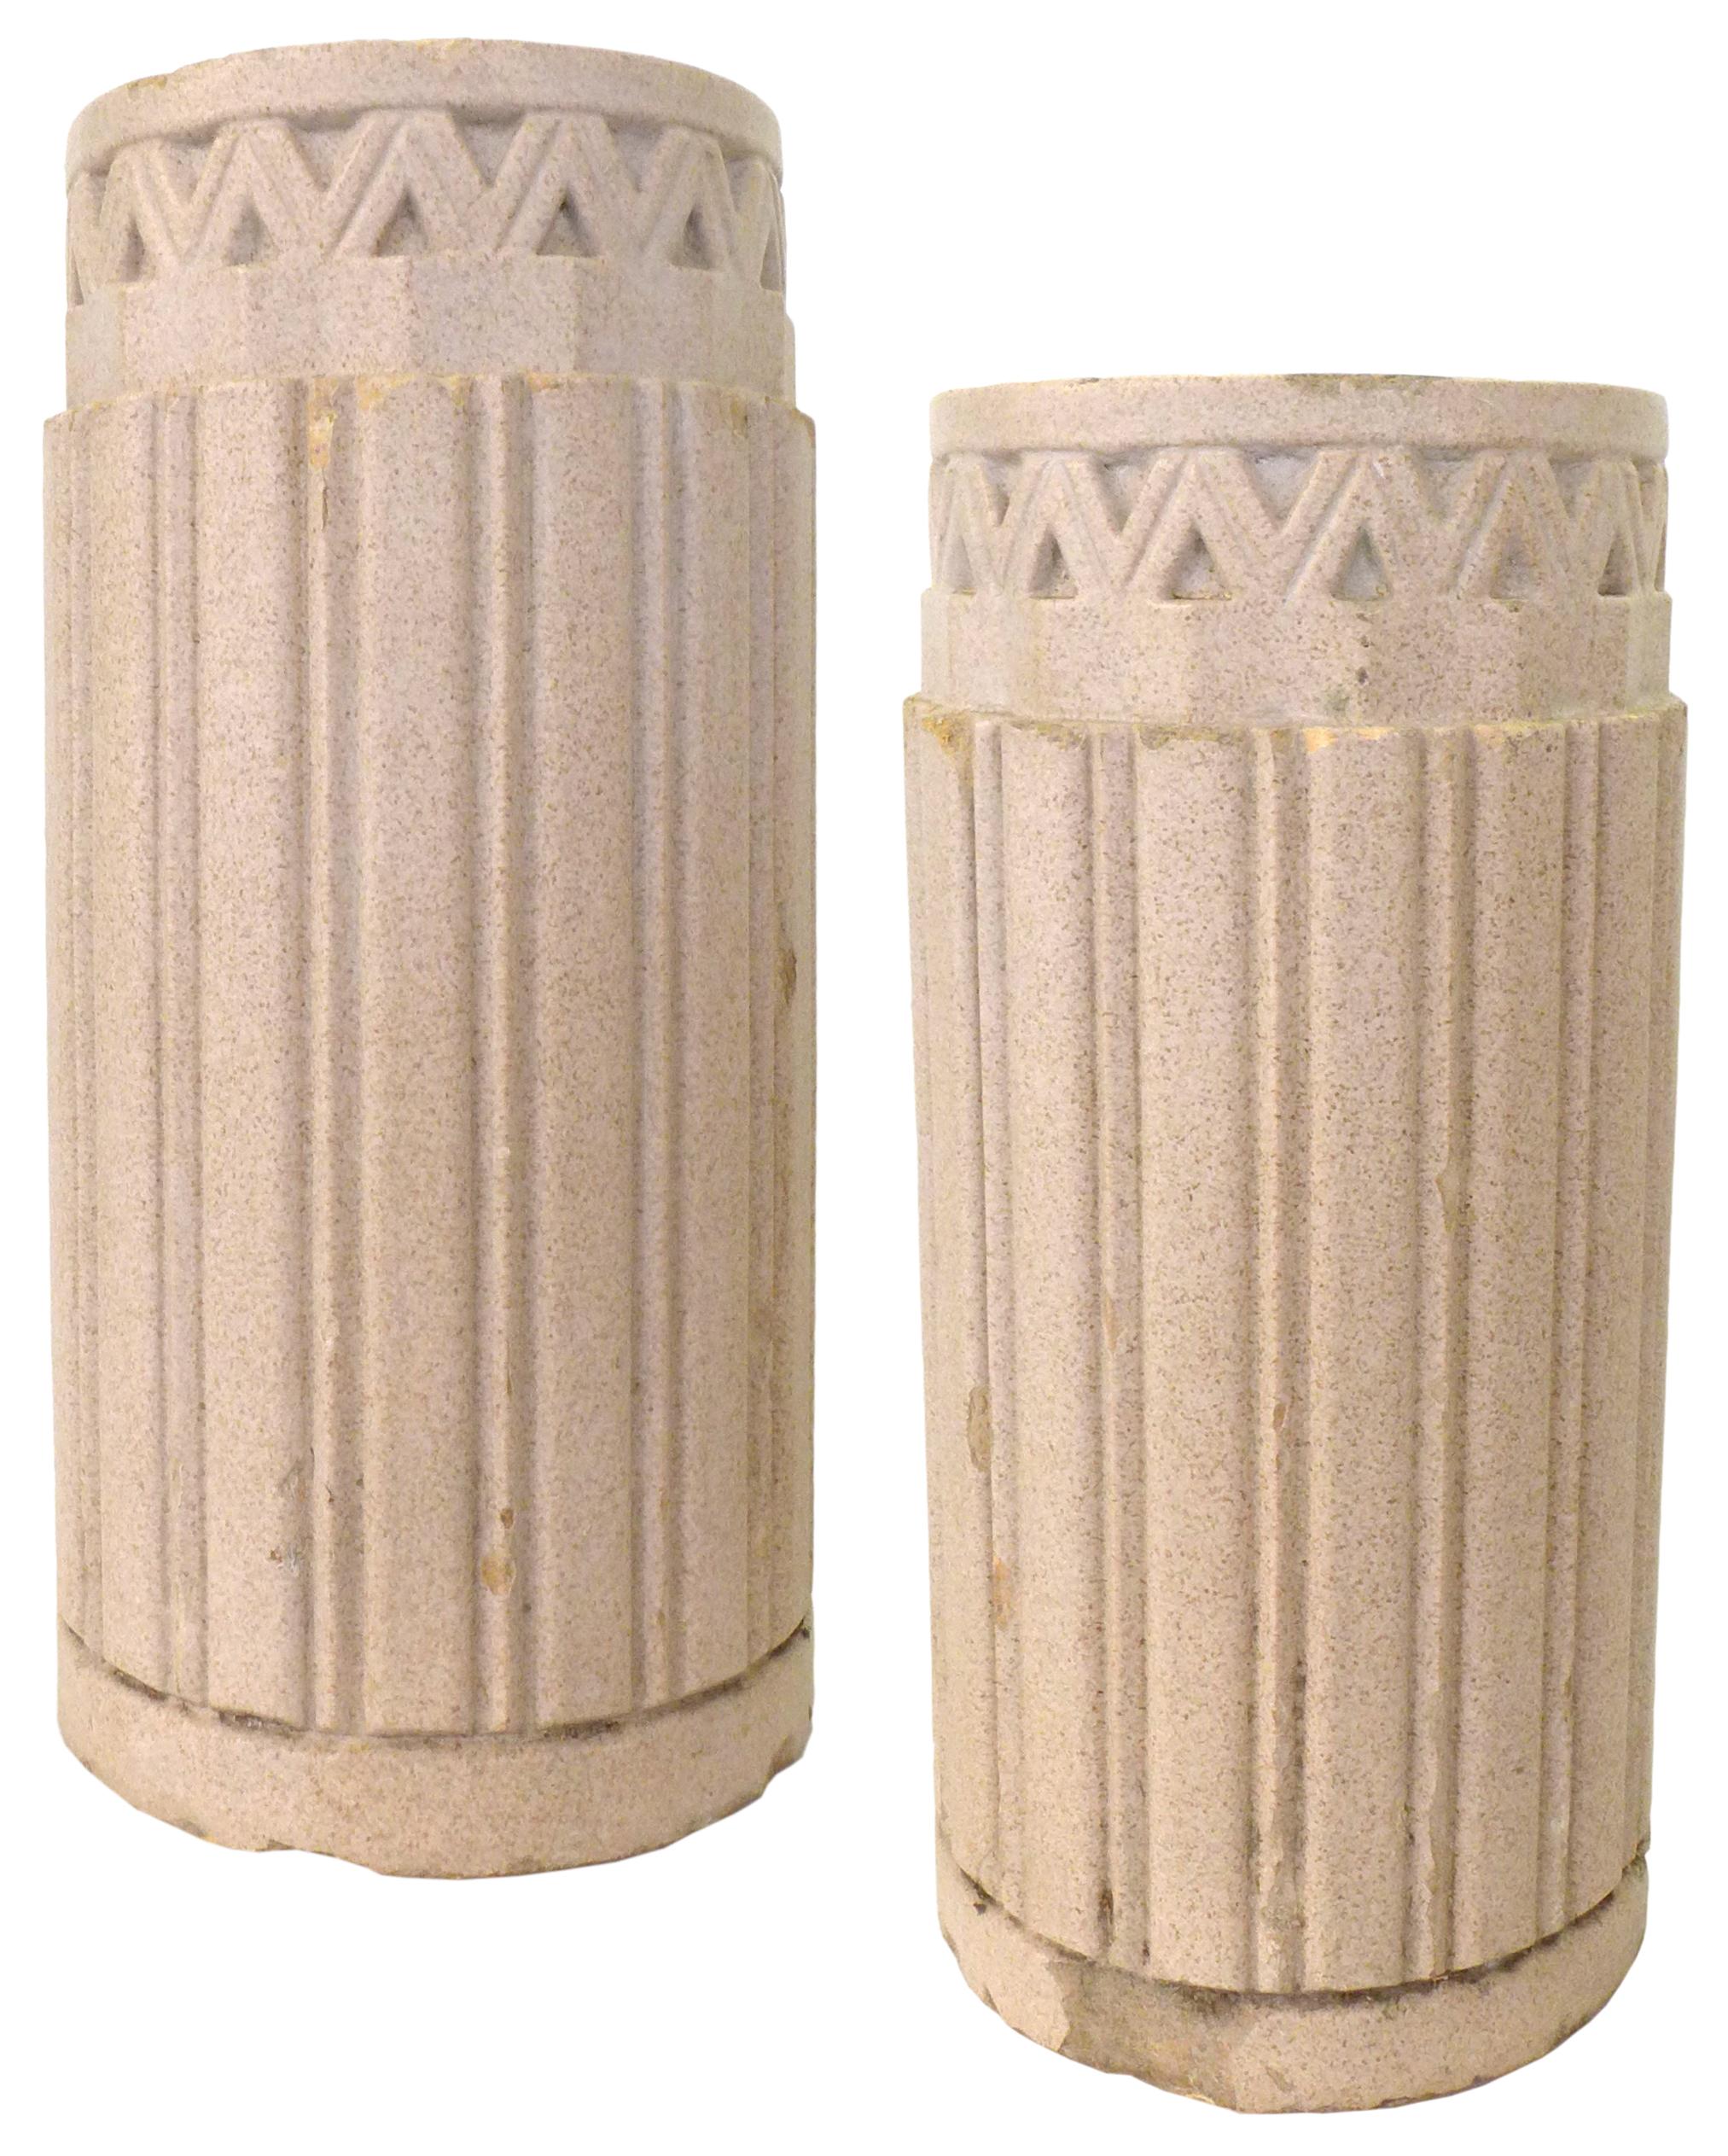 A wonderful pair of architectural planters by Gladding, McBean & Company. Powerful, fluted columnar vessels crowned with geometric ornamentation. Minor wear throughout from years of life outdoors, adding to the pieces' presence and history.